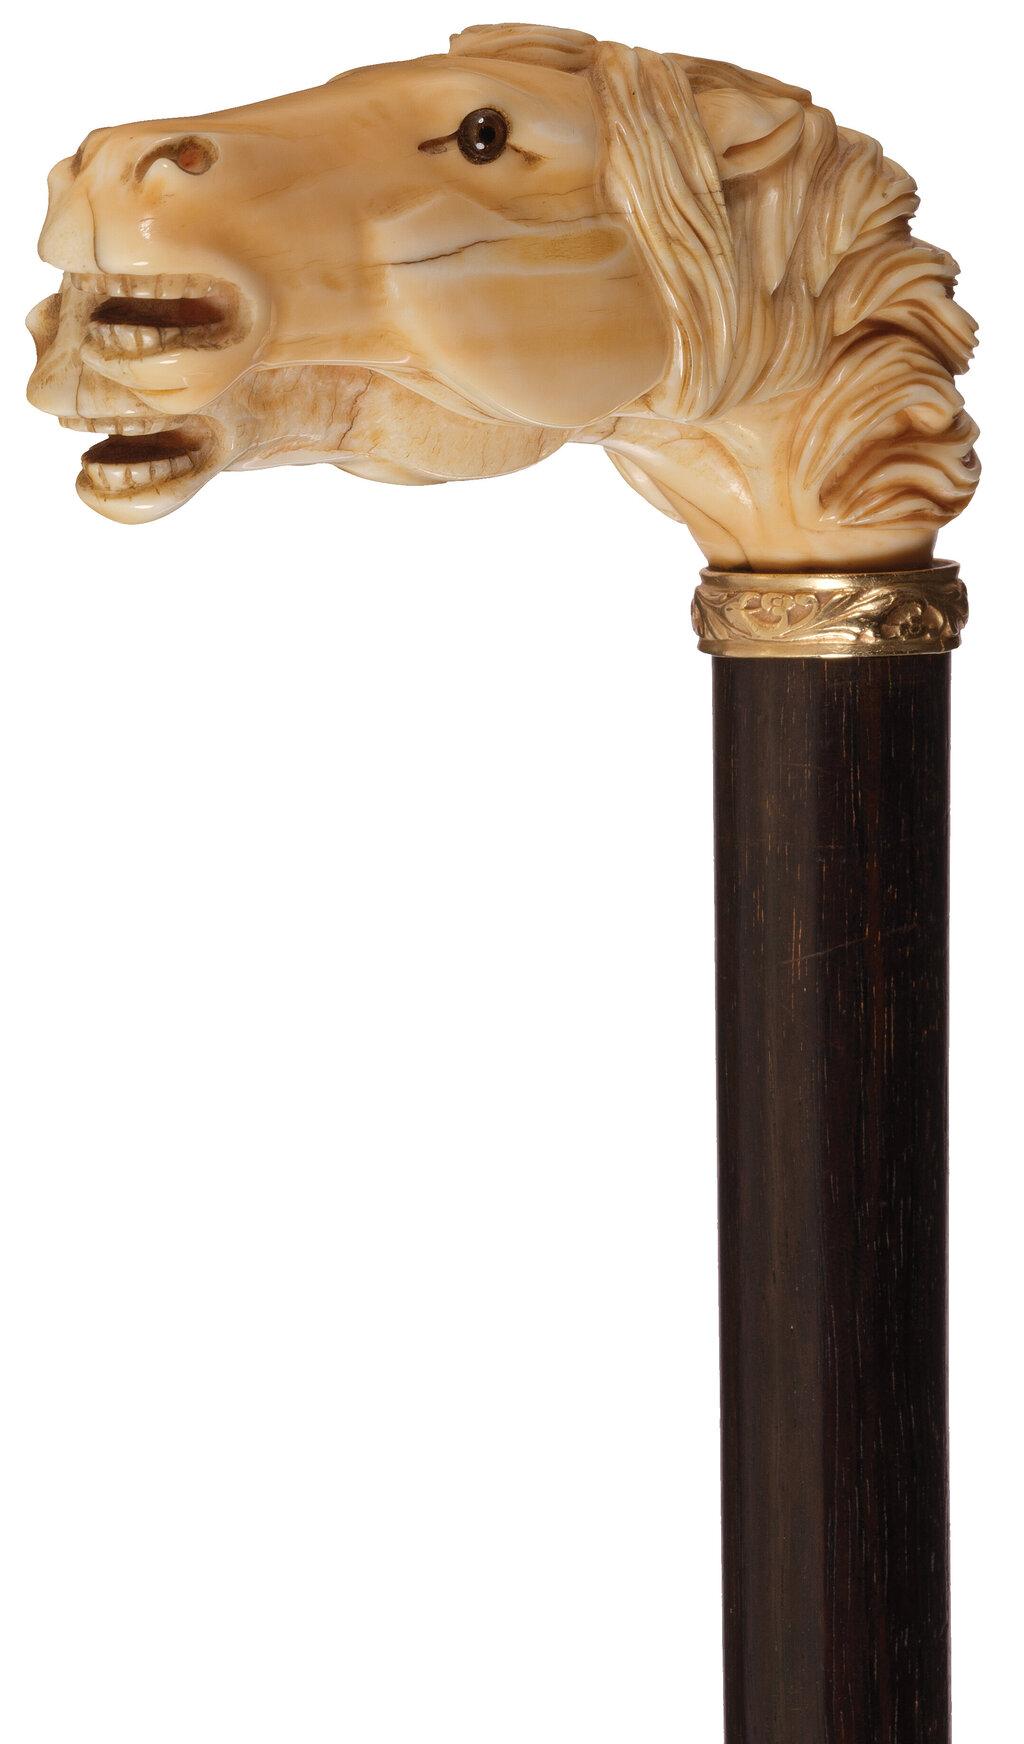 Relief Carved Double Horse Head Cane with Gilt Band